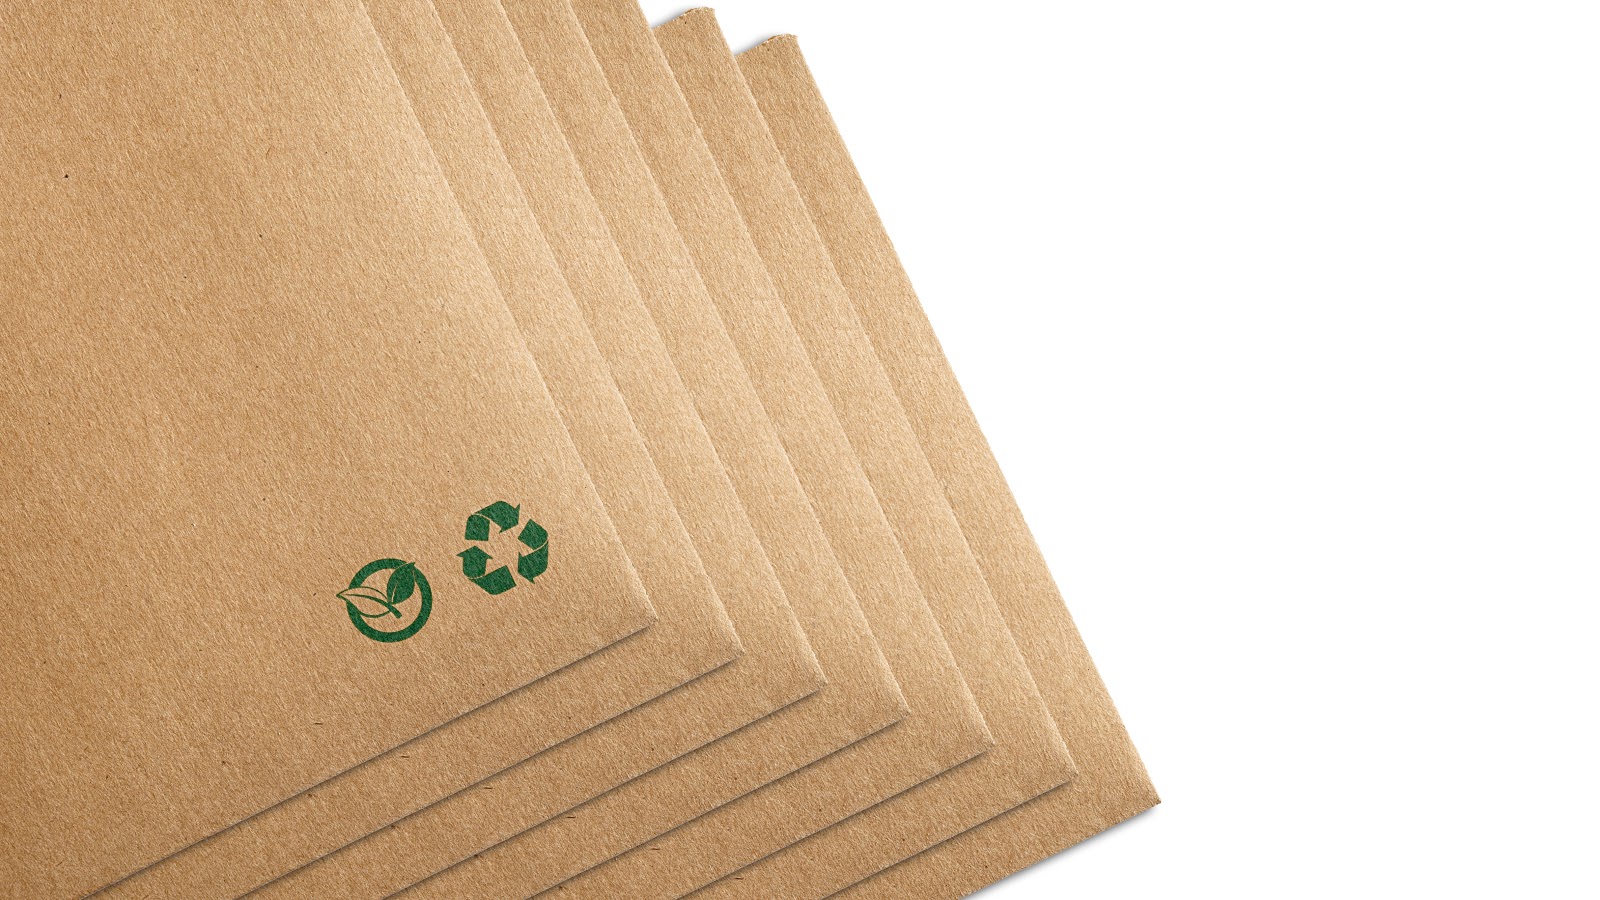 Recycled envelopes with green sustainability icons.jpg